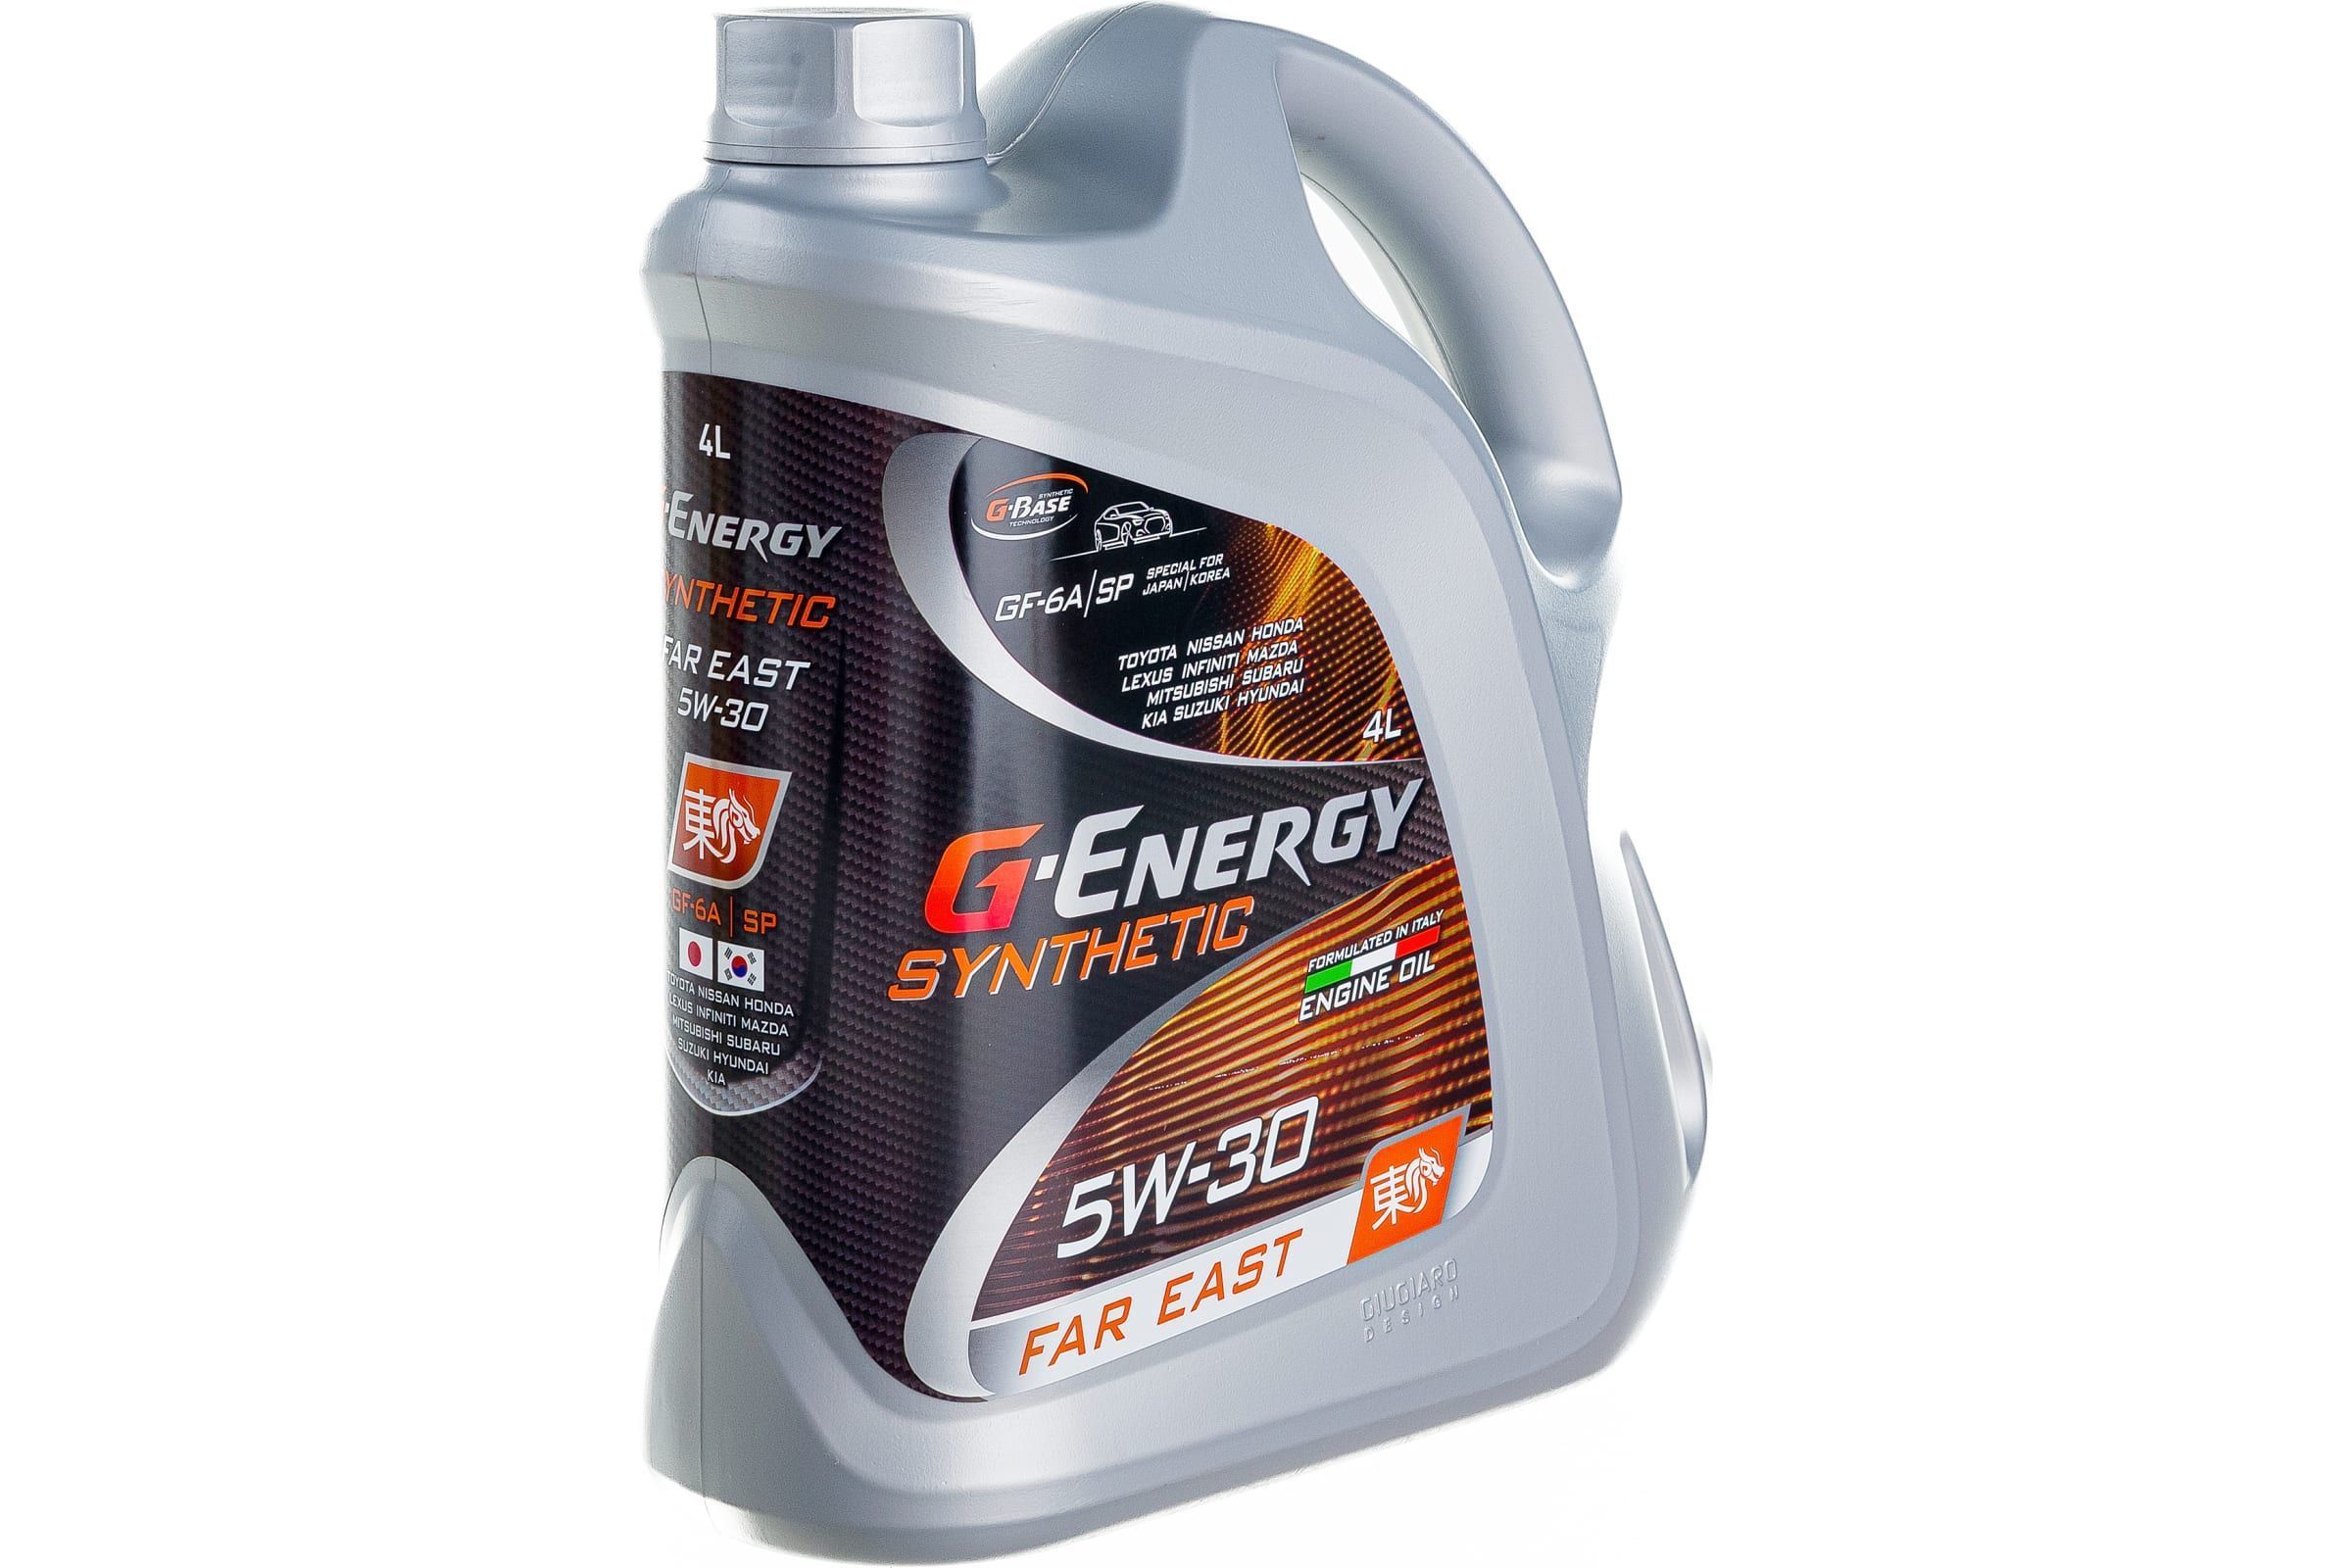 Масло g energy synthetic 5w 30